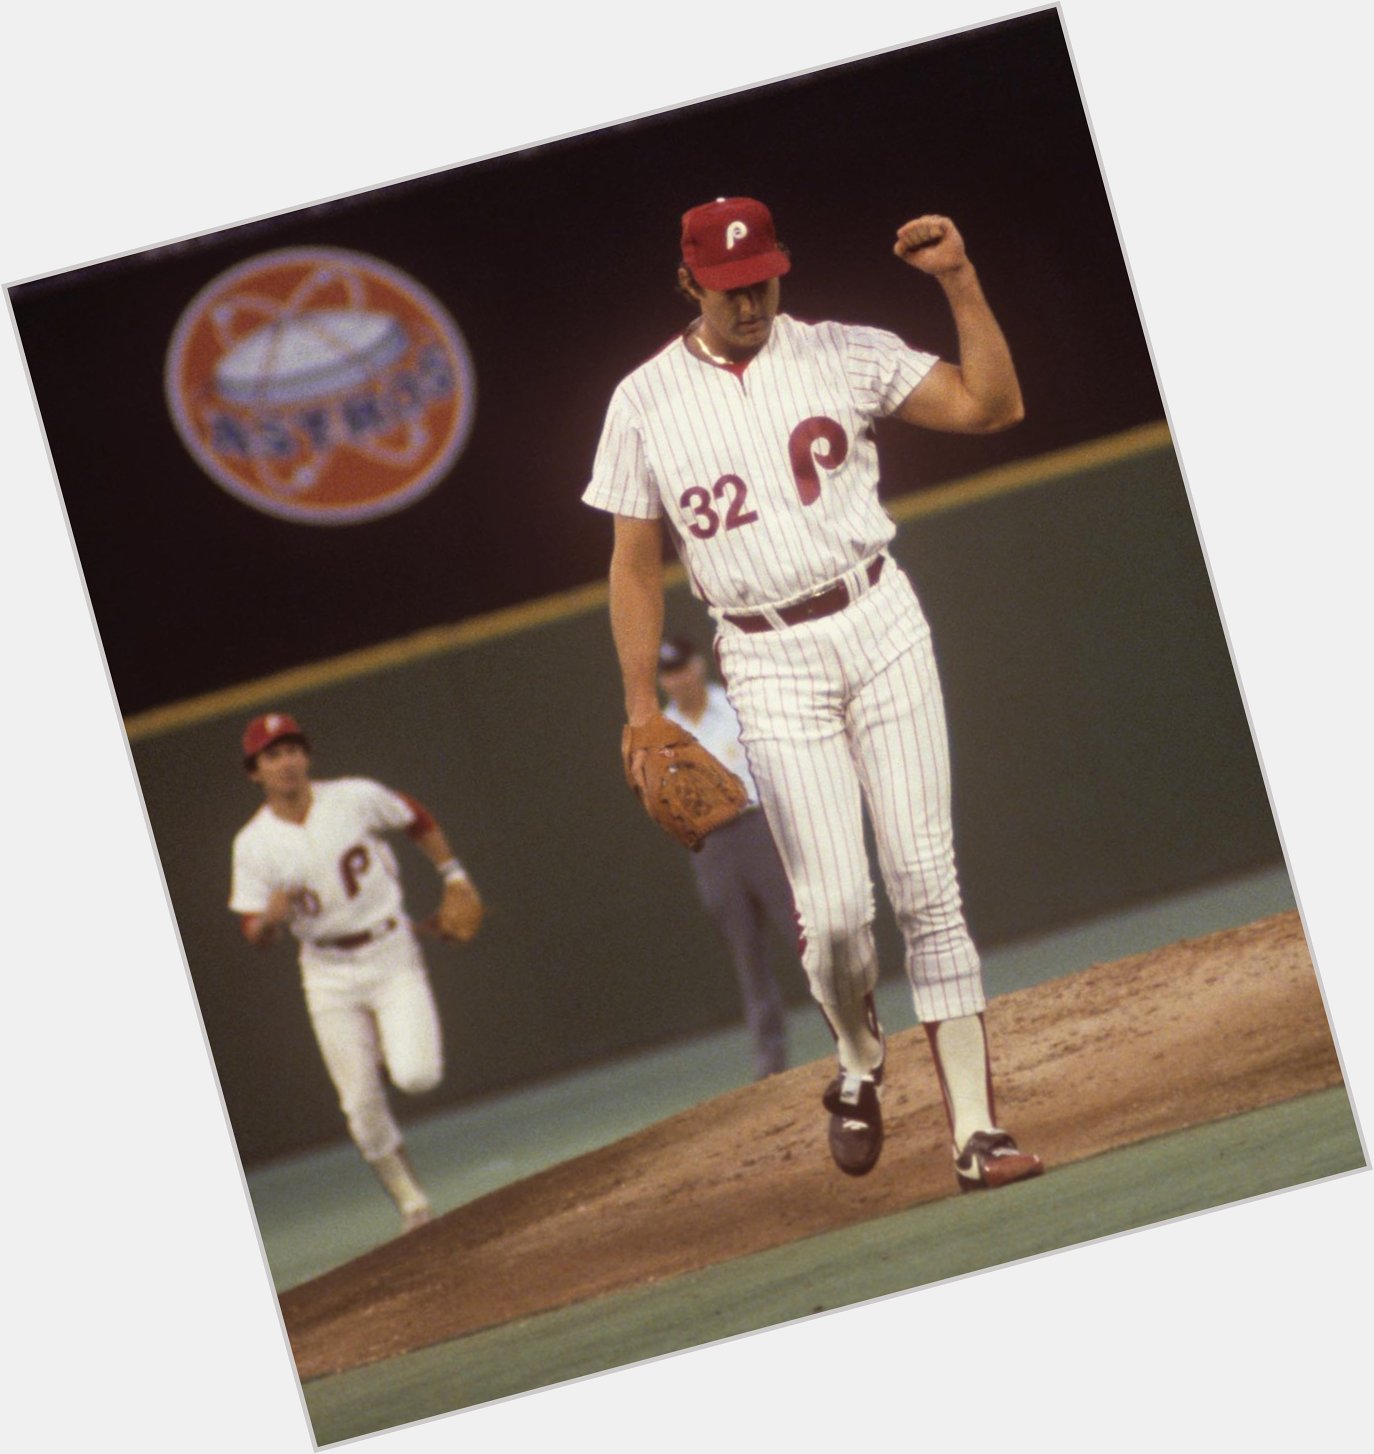 Yes, Steve Carlton is 70 today. Happy Birthday to Lefty! 